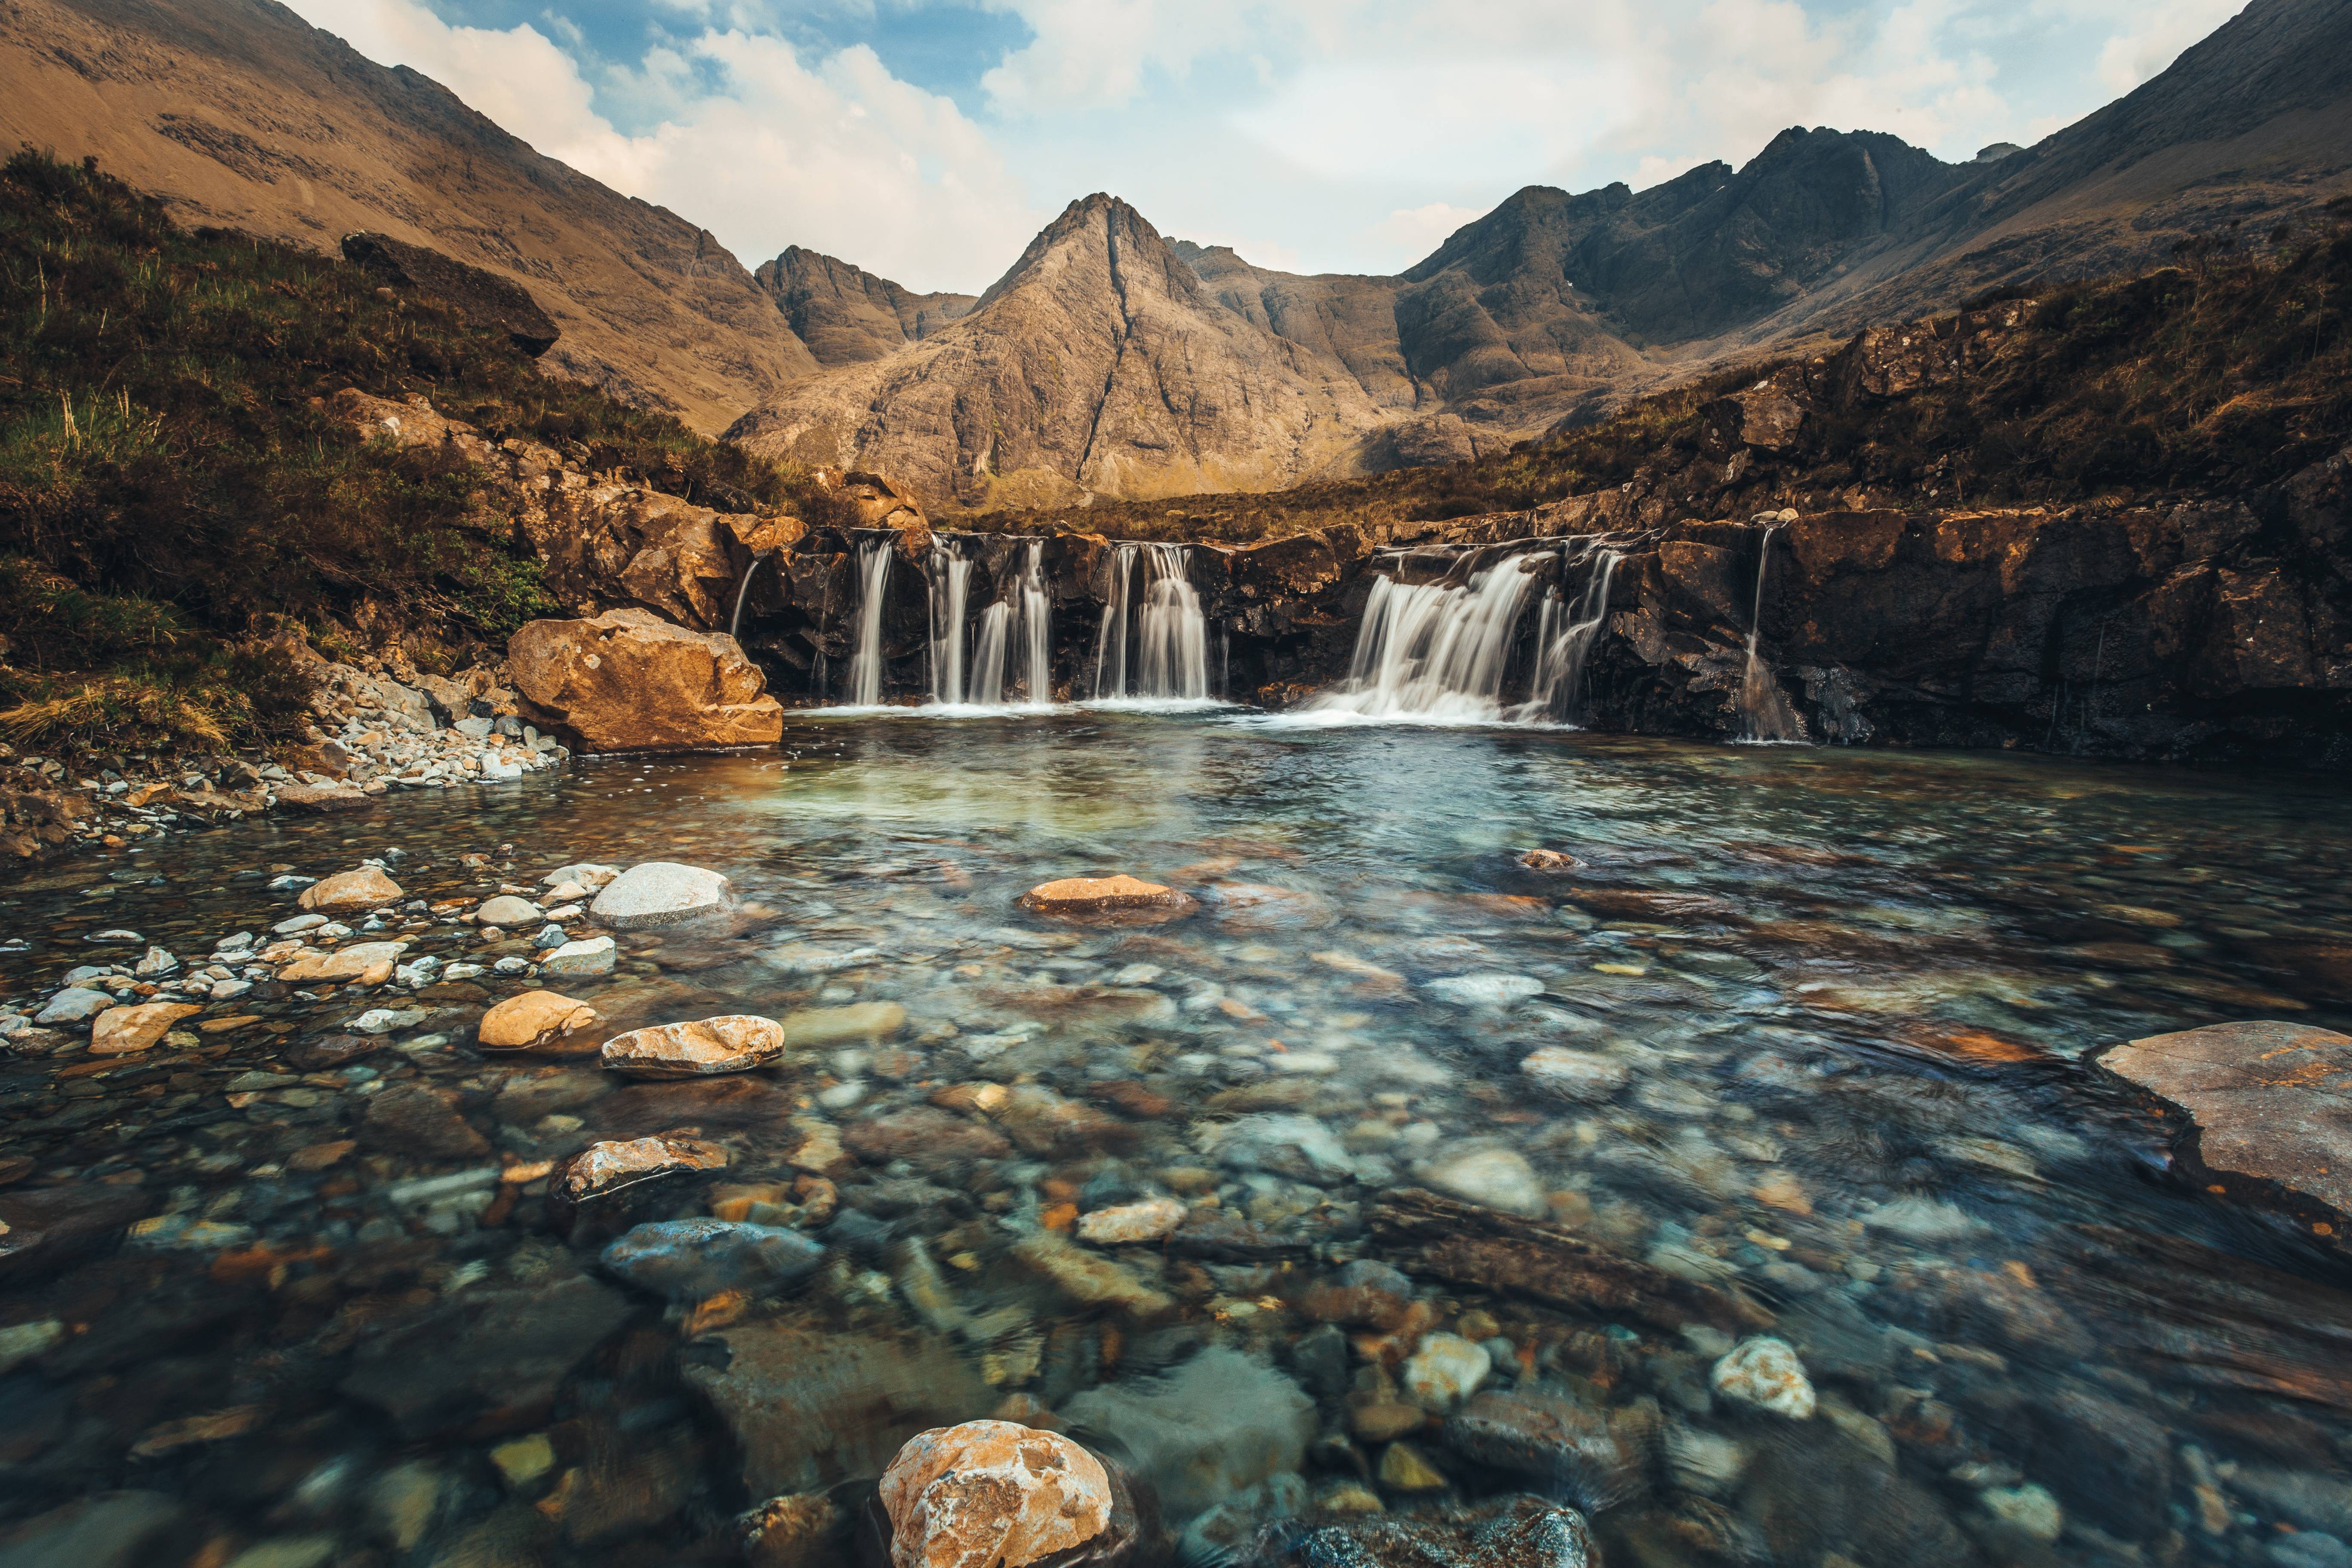 General 5472x3648 The Fairy Pools Fairy Pools Skye Scotland water mountains waterfall long exposure